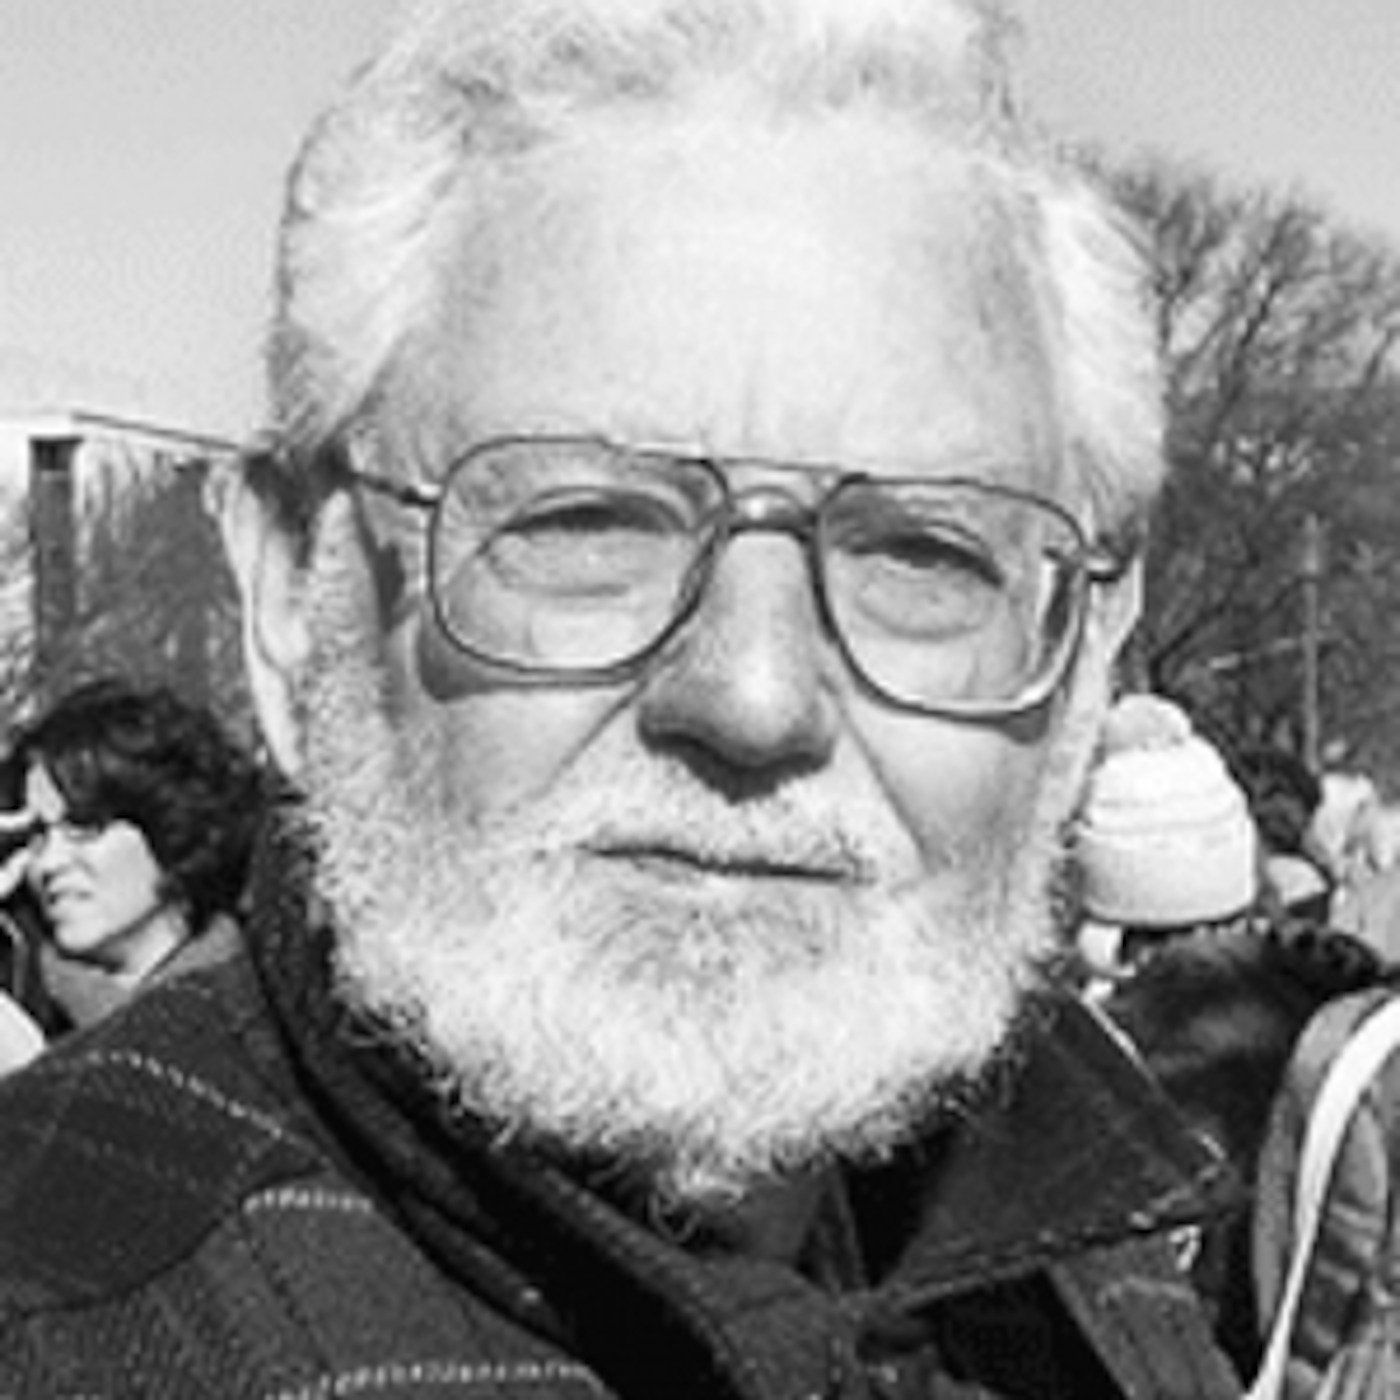 William Blum’s Legacy Smeared in NYT’s Obituary Pages